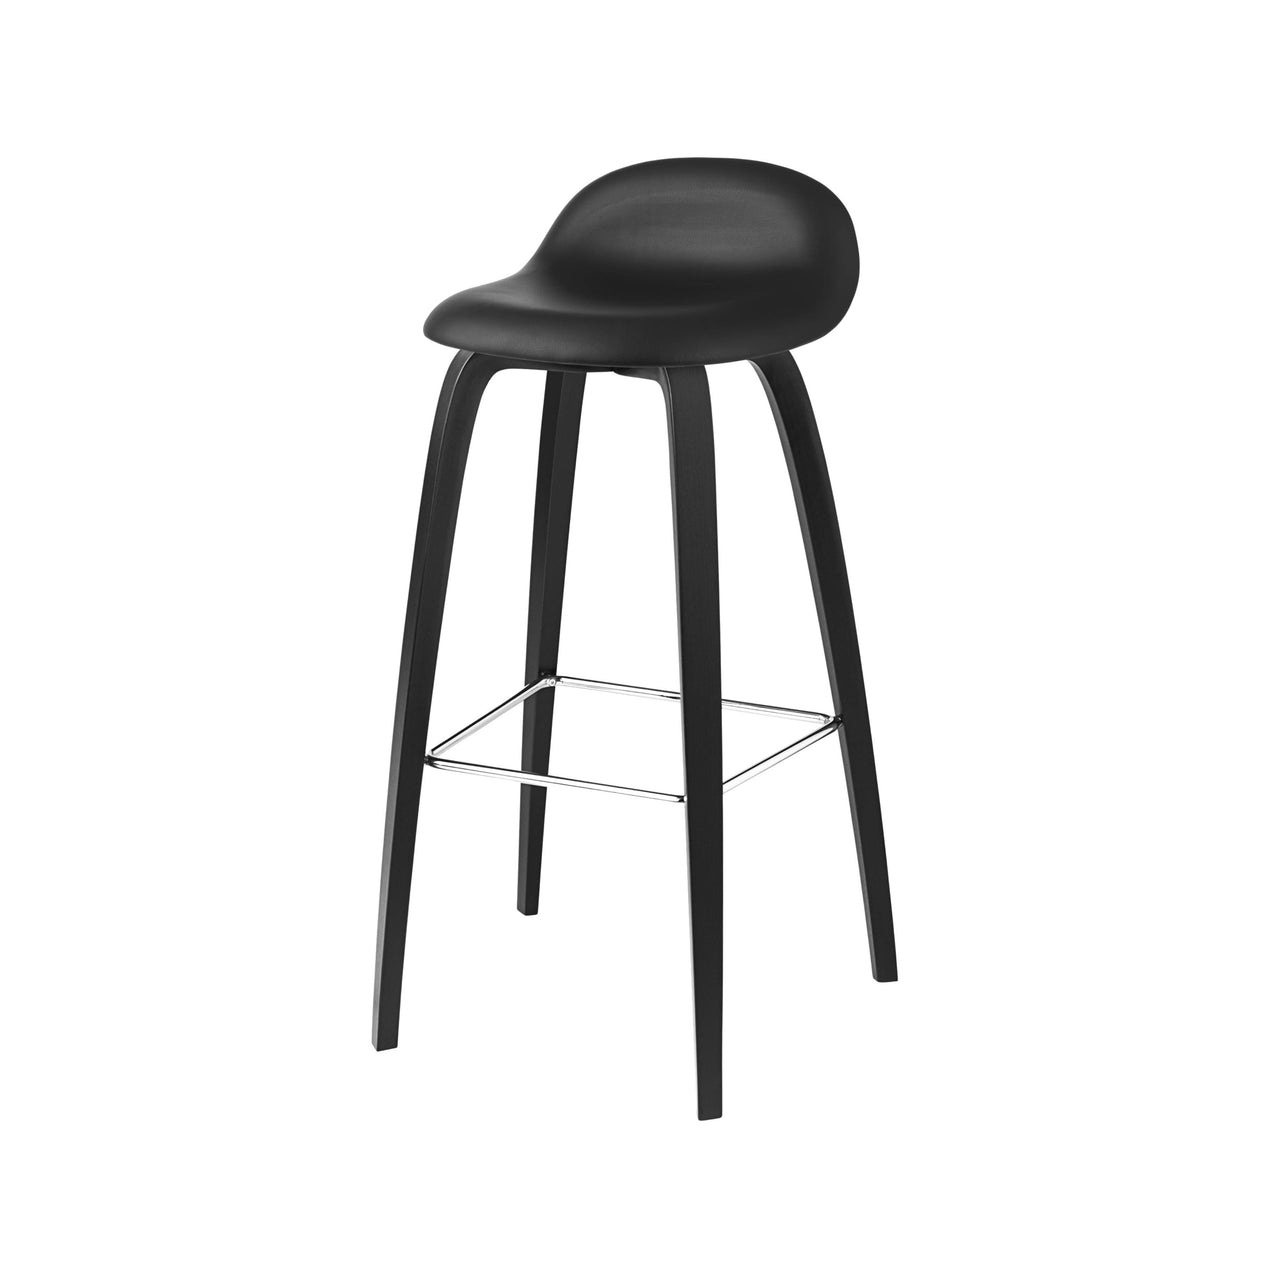 3D Bar + Counter Stool: Wood Base + Full Upholstery + Counter + Black Stained Beech